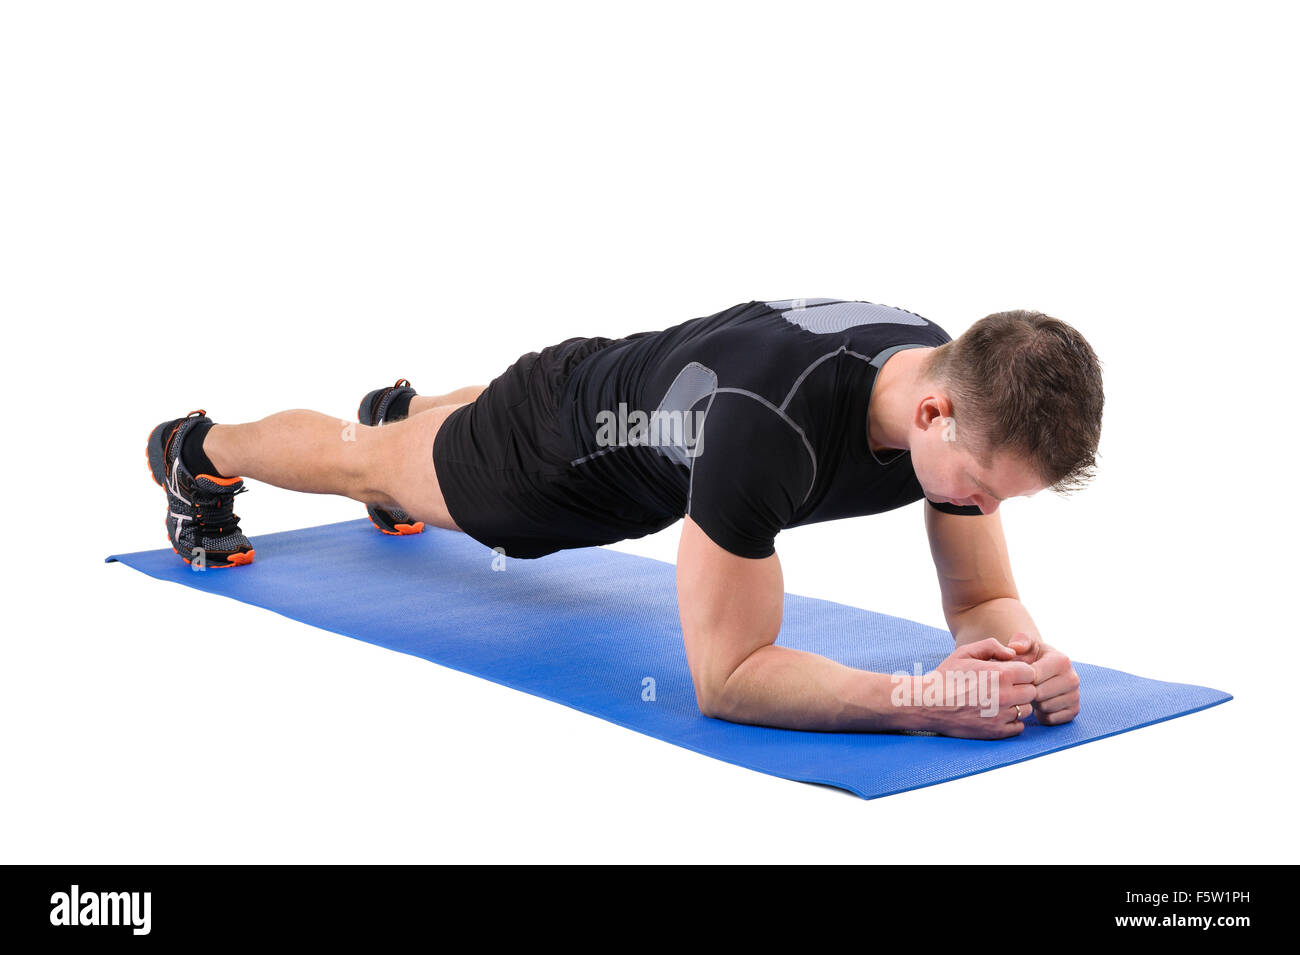 Young man doing Elbow Plank Workout Stock Photo